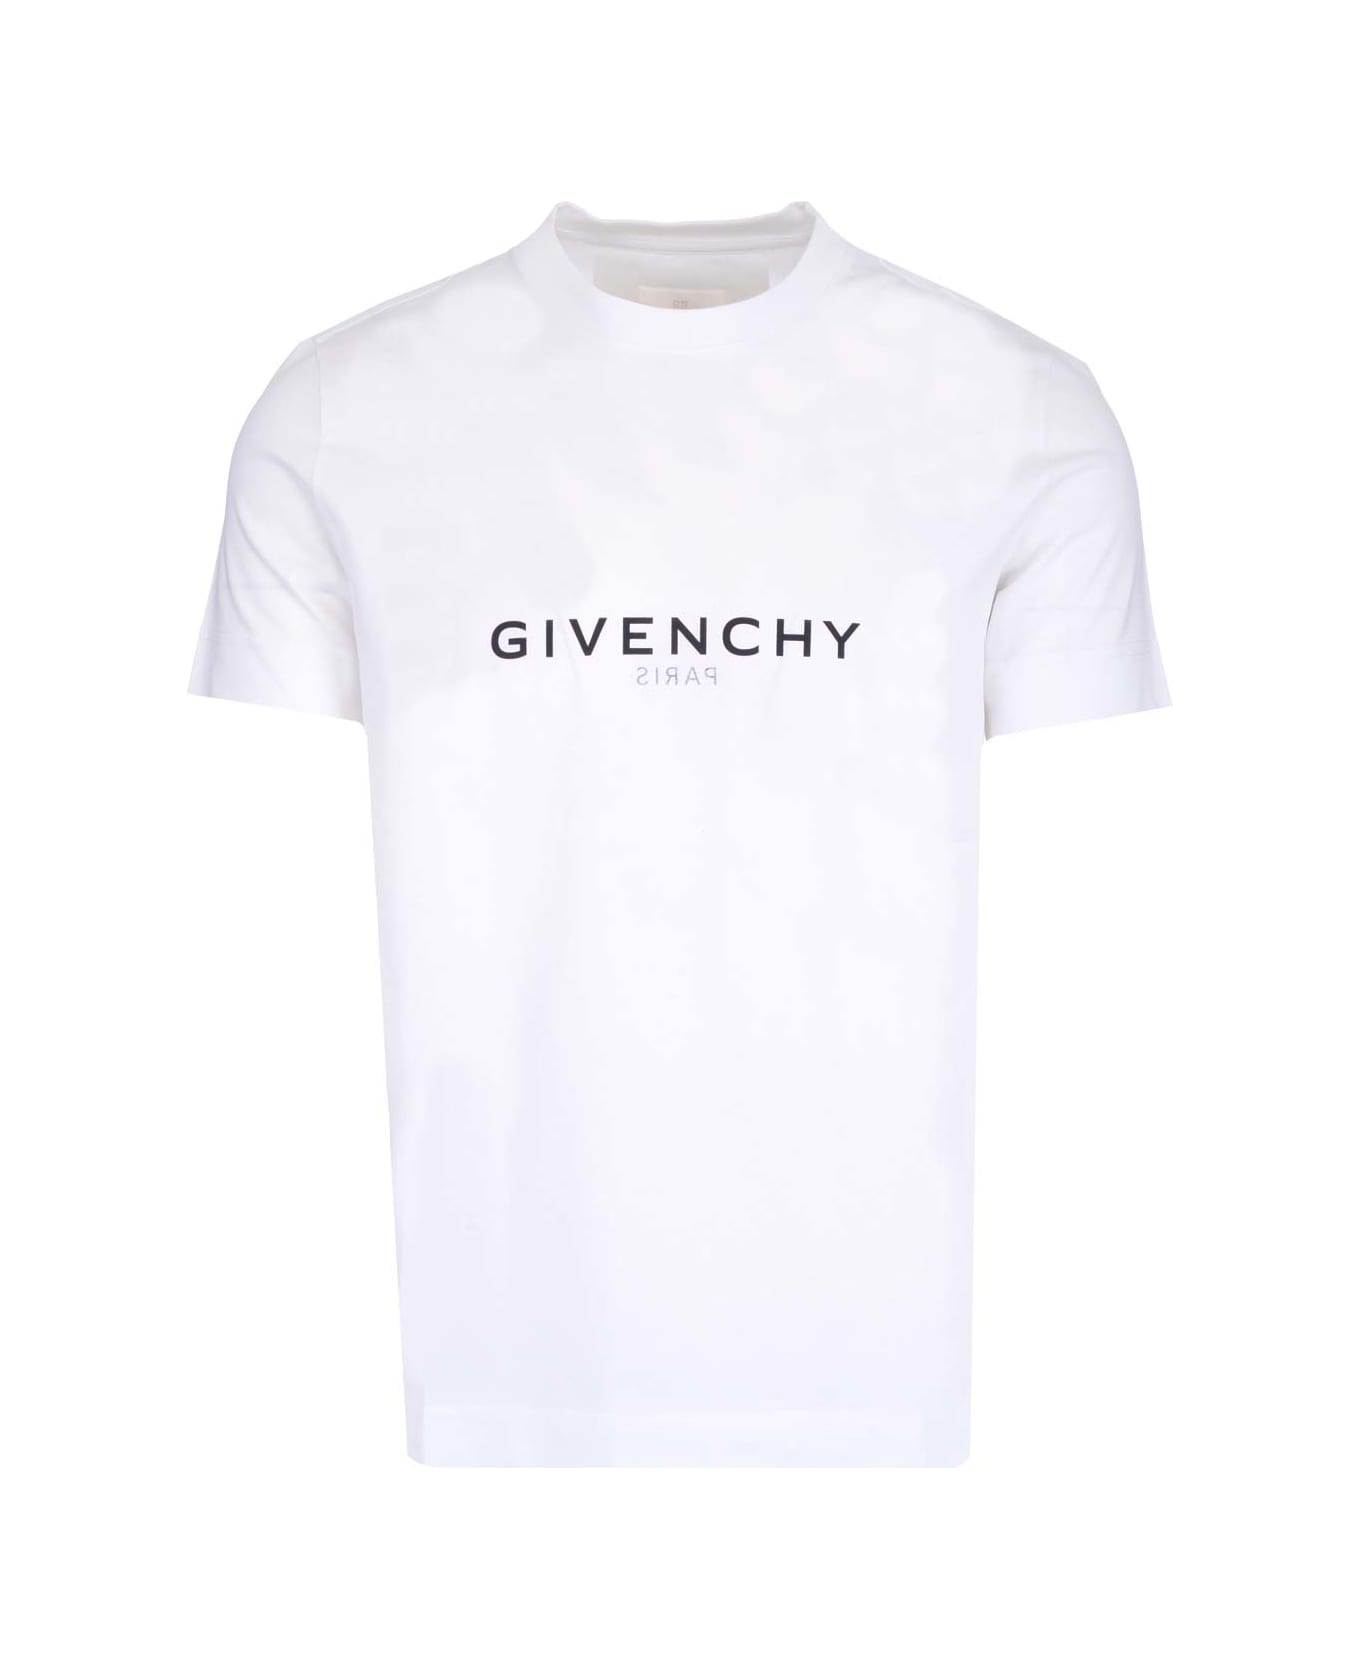 Givenchy Reverse T-shirt - White